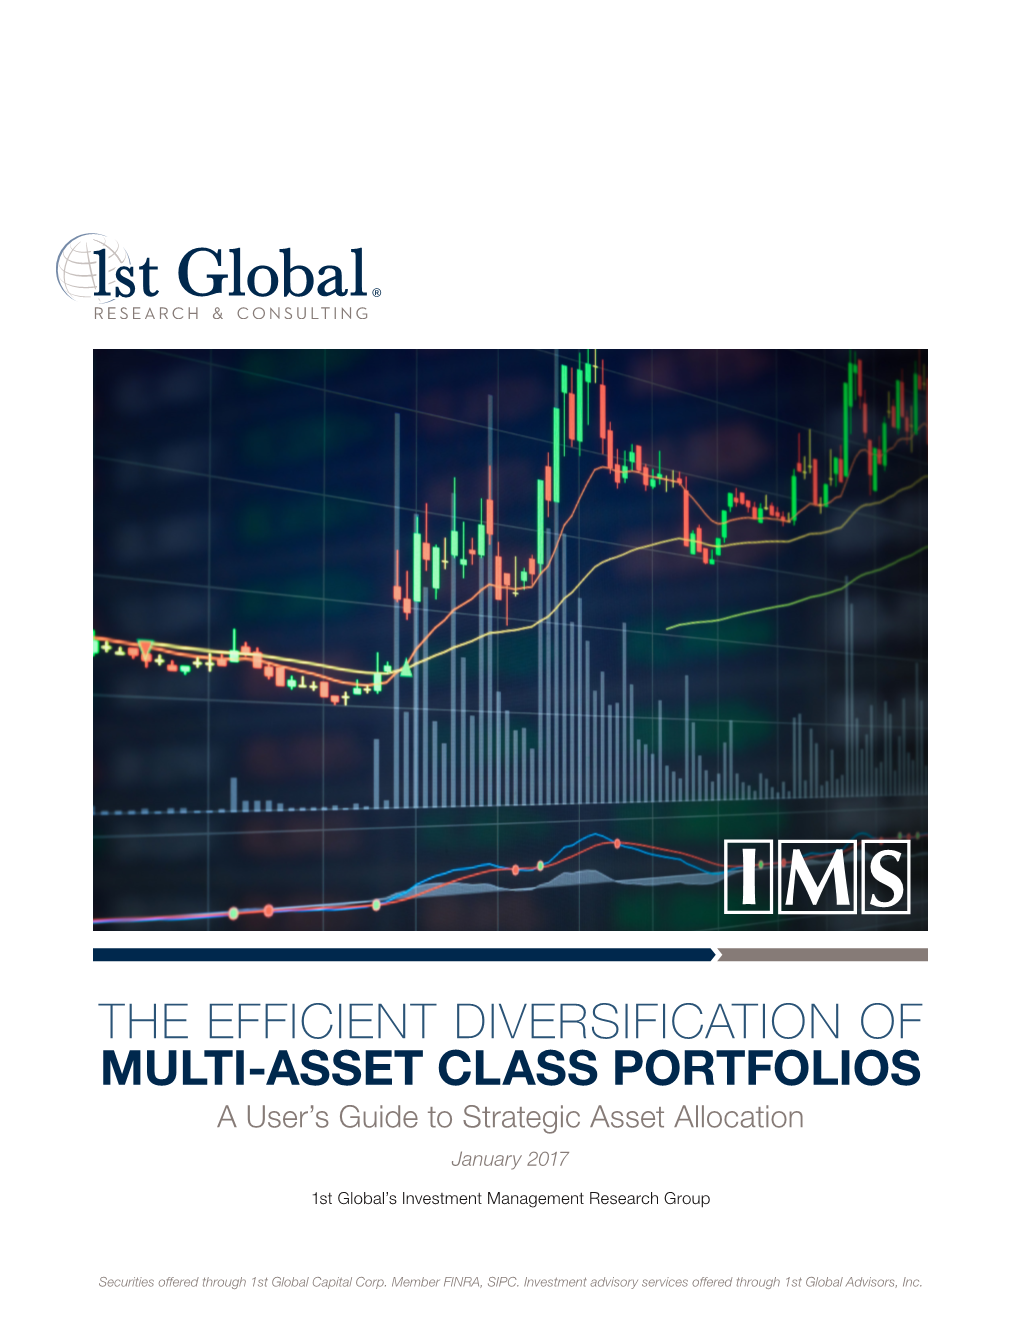 THE EFFICIENT DIVERSIFICATION of MULTI-ASSET CLASS PORTFOLIOS a User’S Guide to Strategic Asset Allocation January 2017